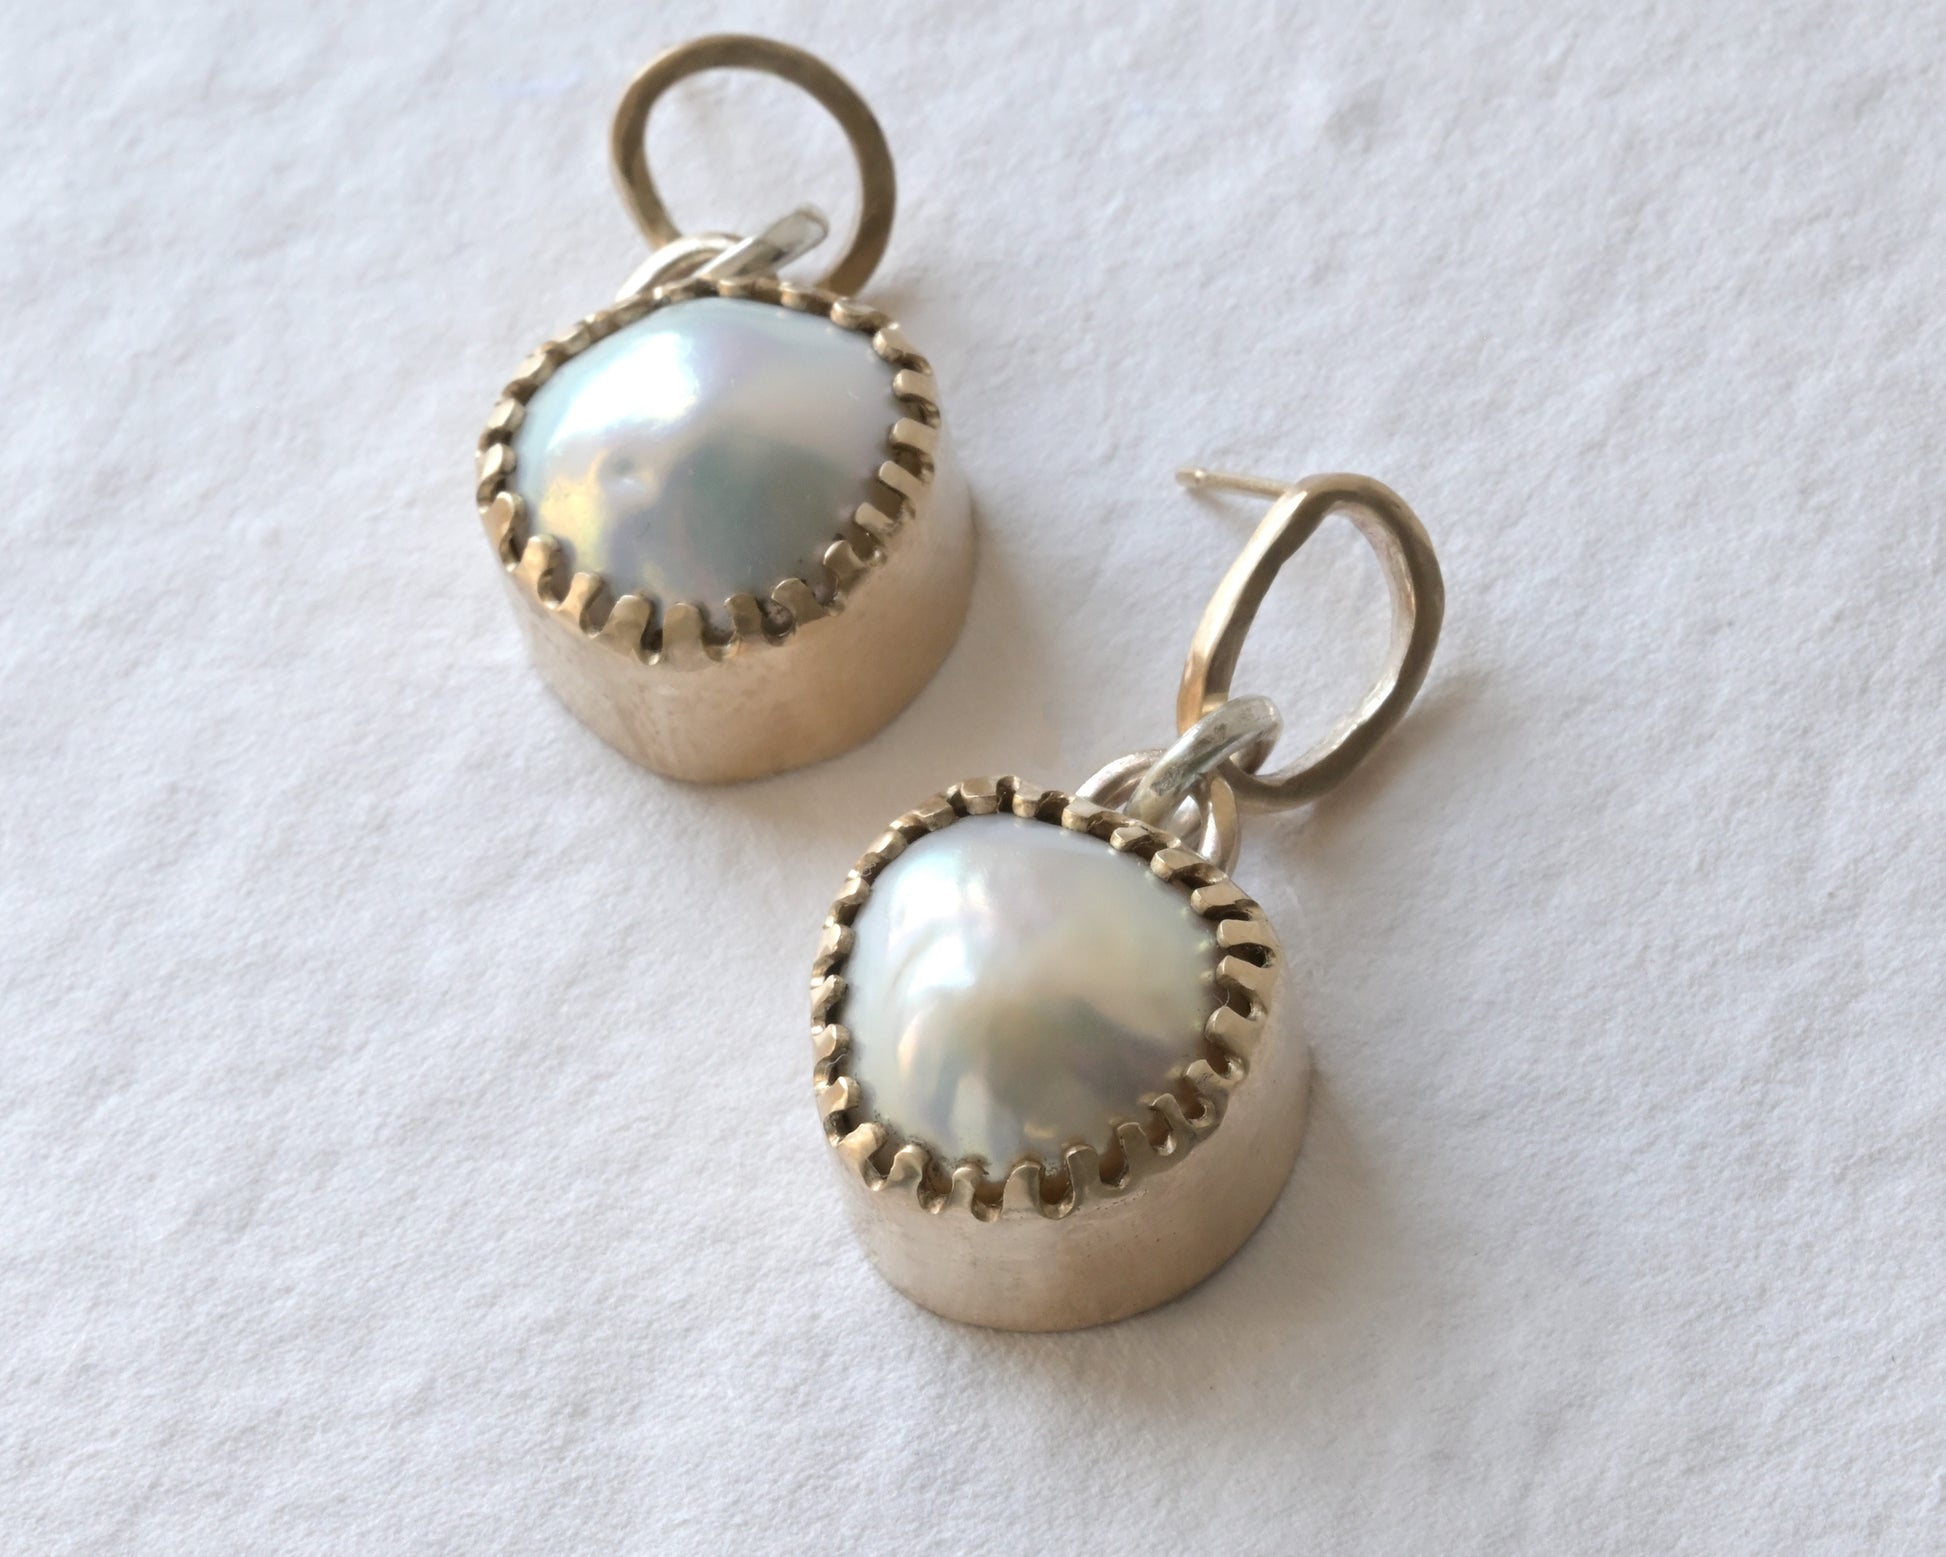 very big pearl earring encased in yellow gold placed on white cotswold white stone.